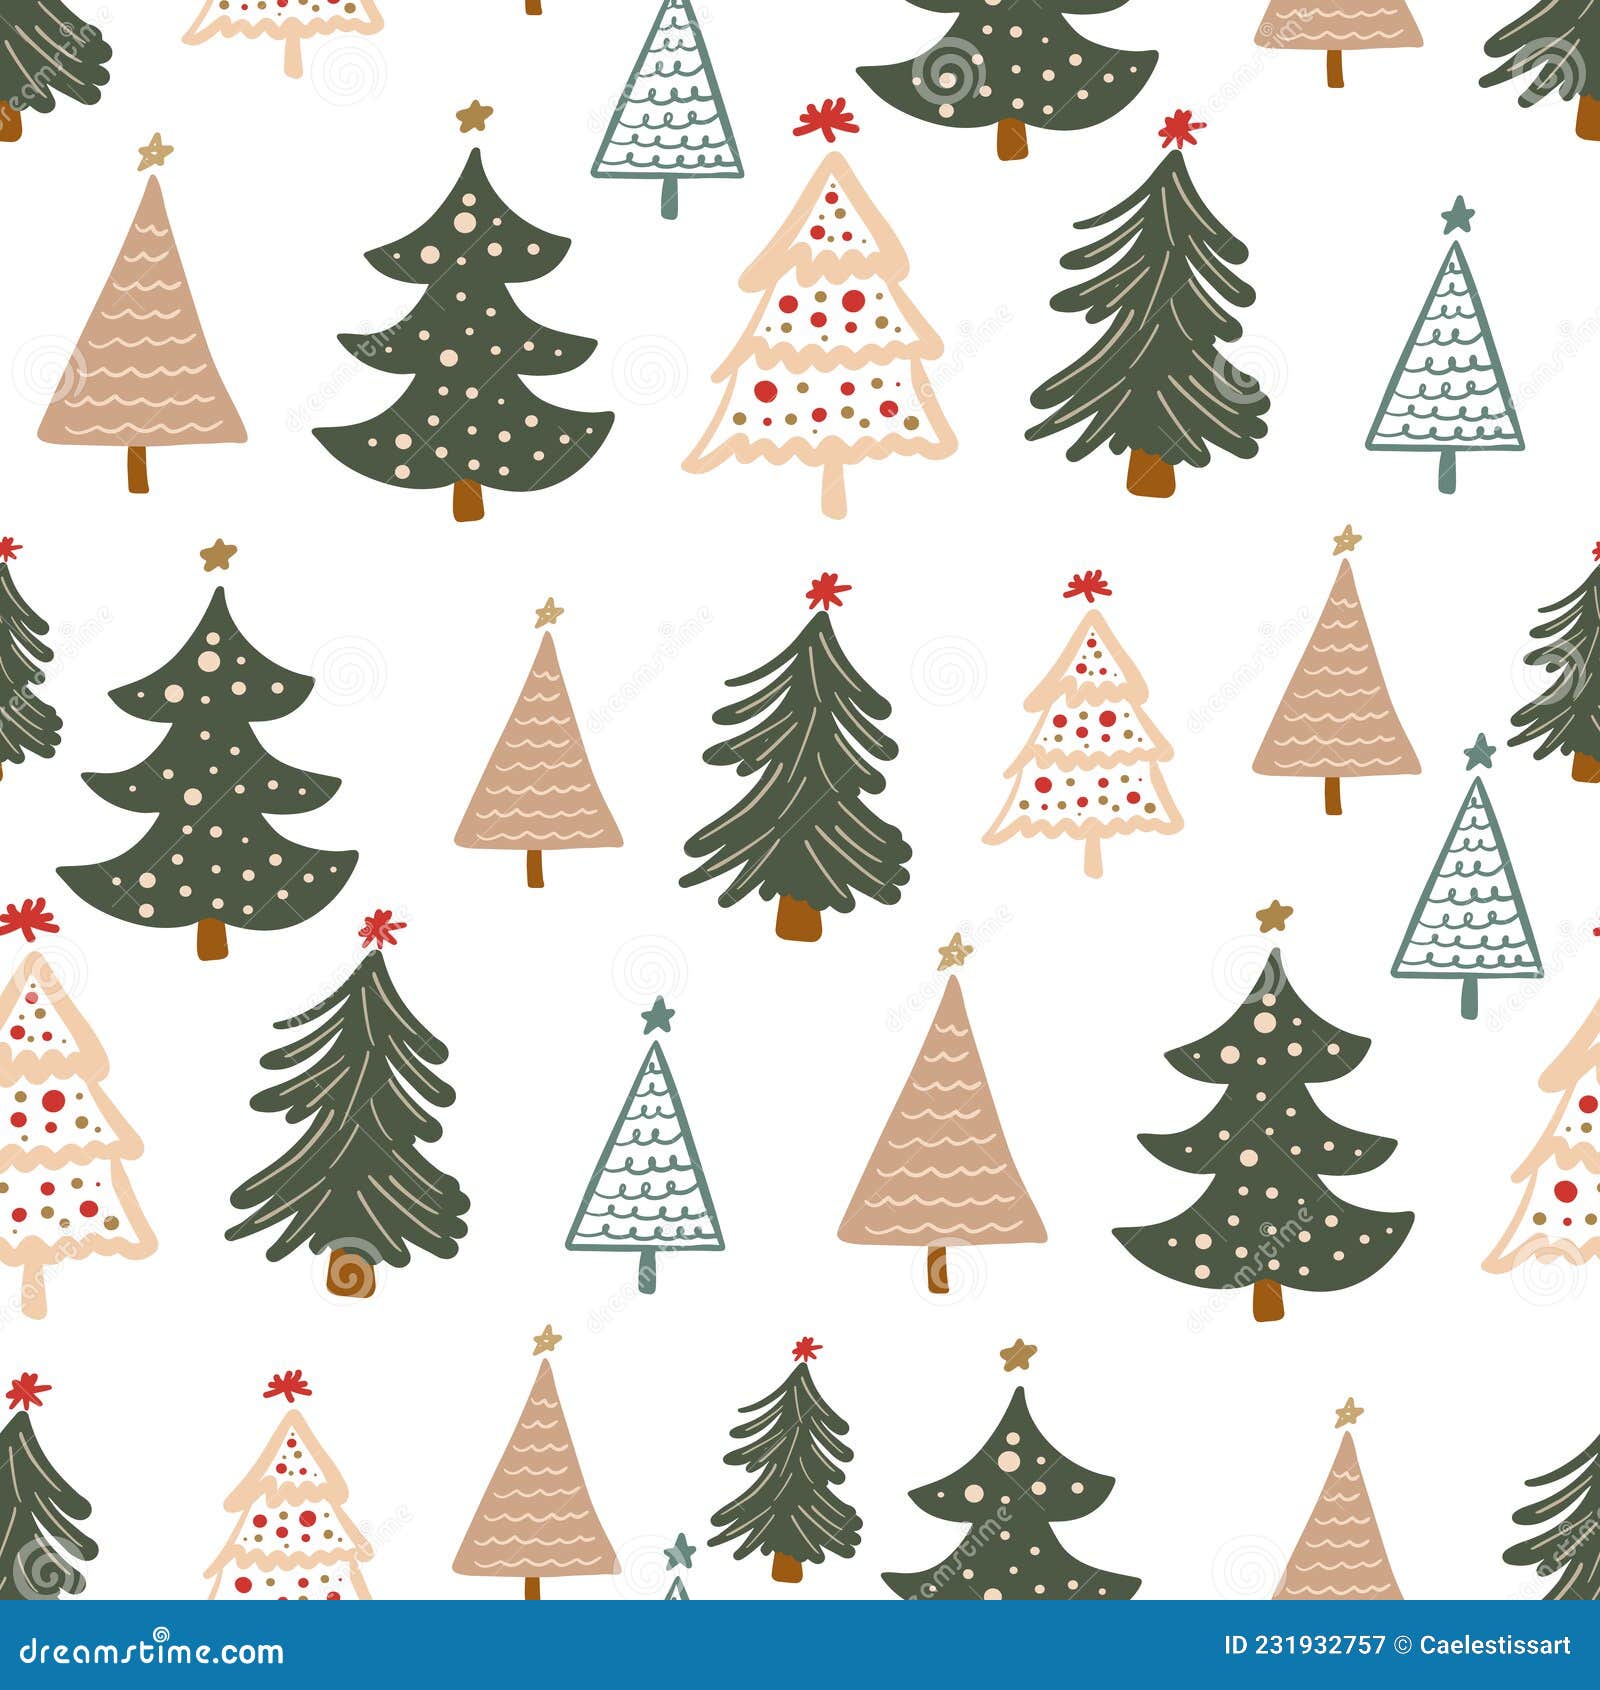 Christmas trees background - simple seamless vector texture. Gift